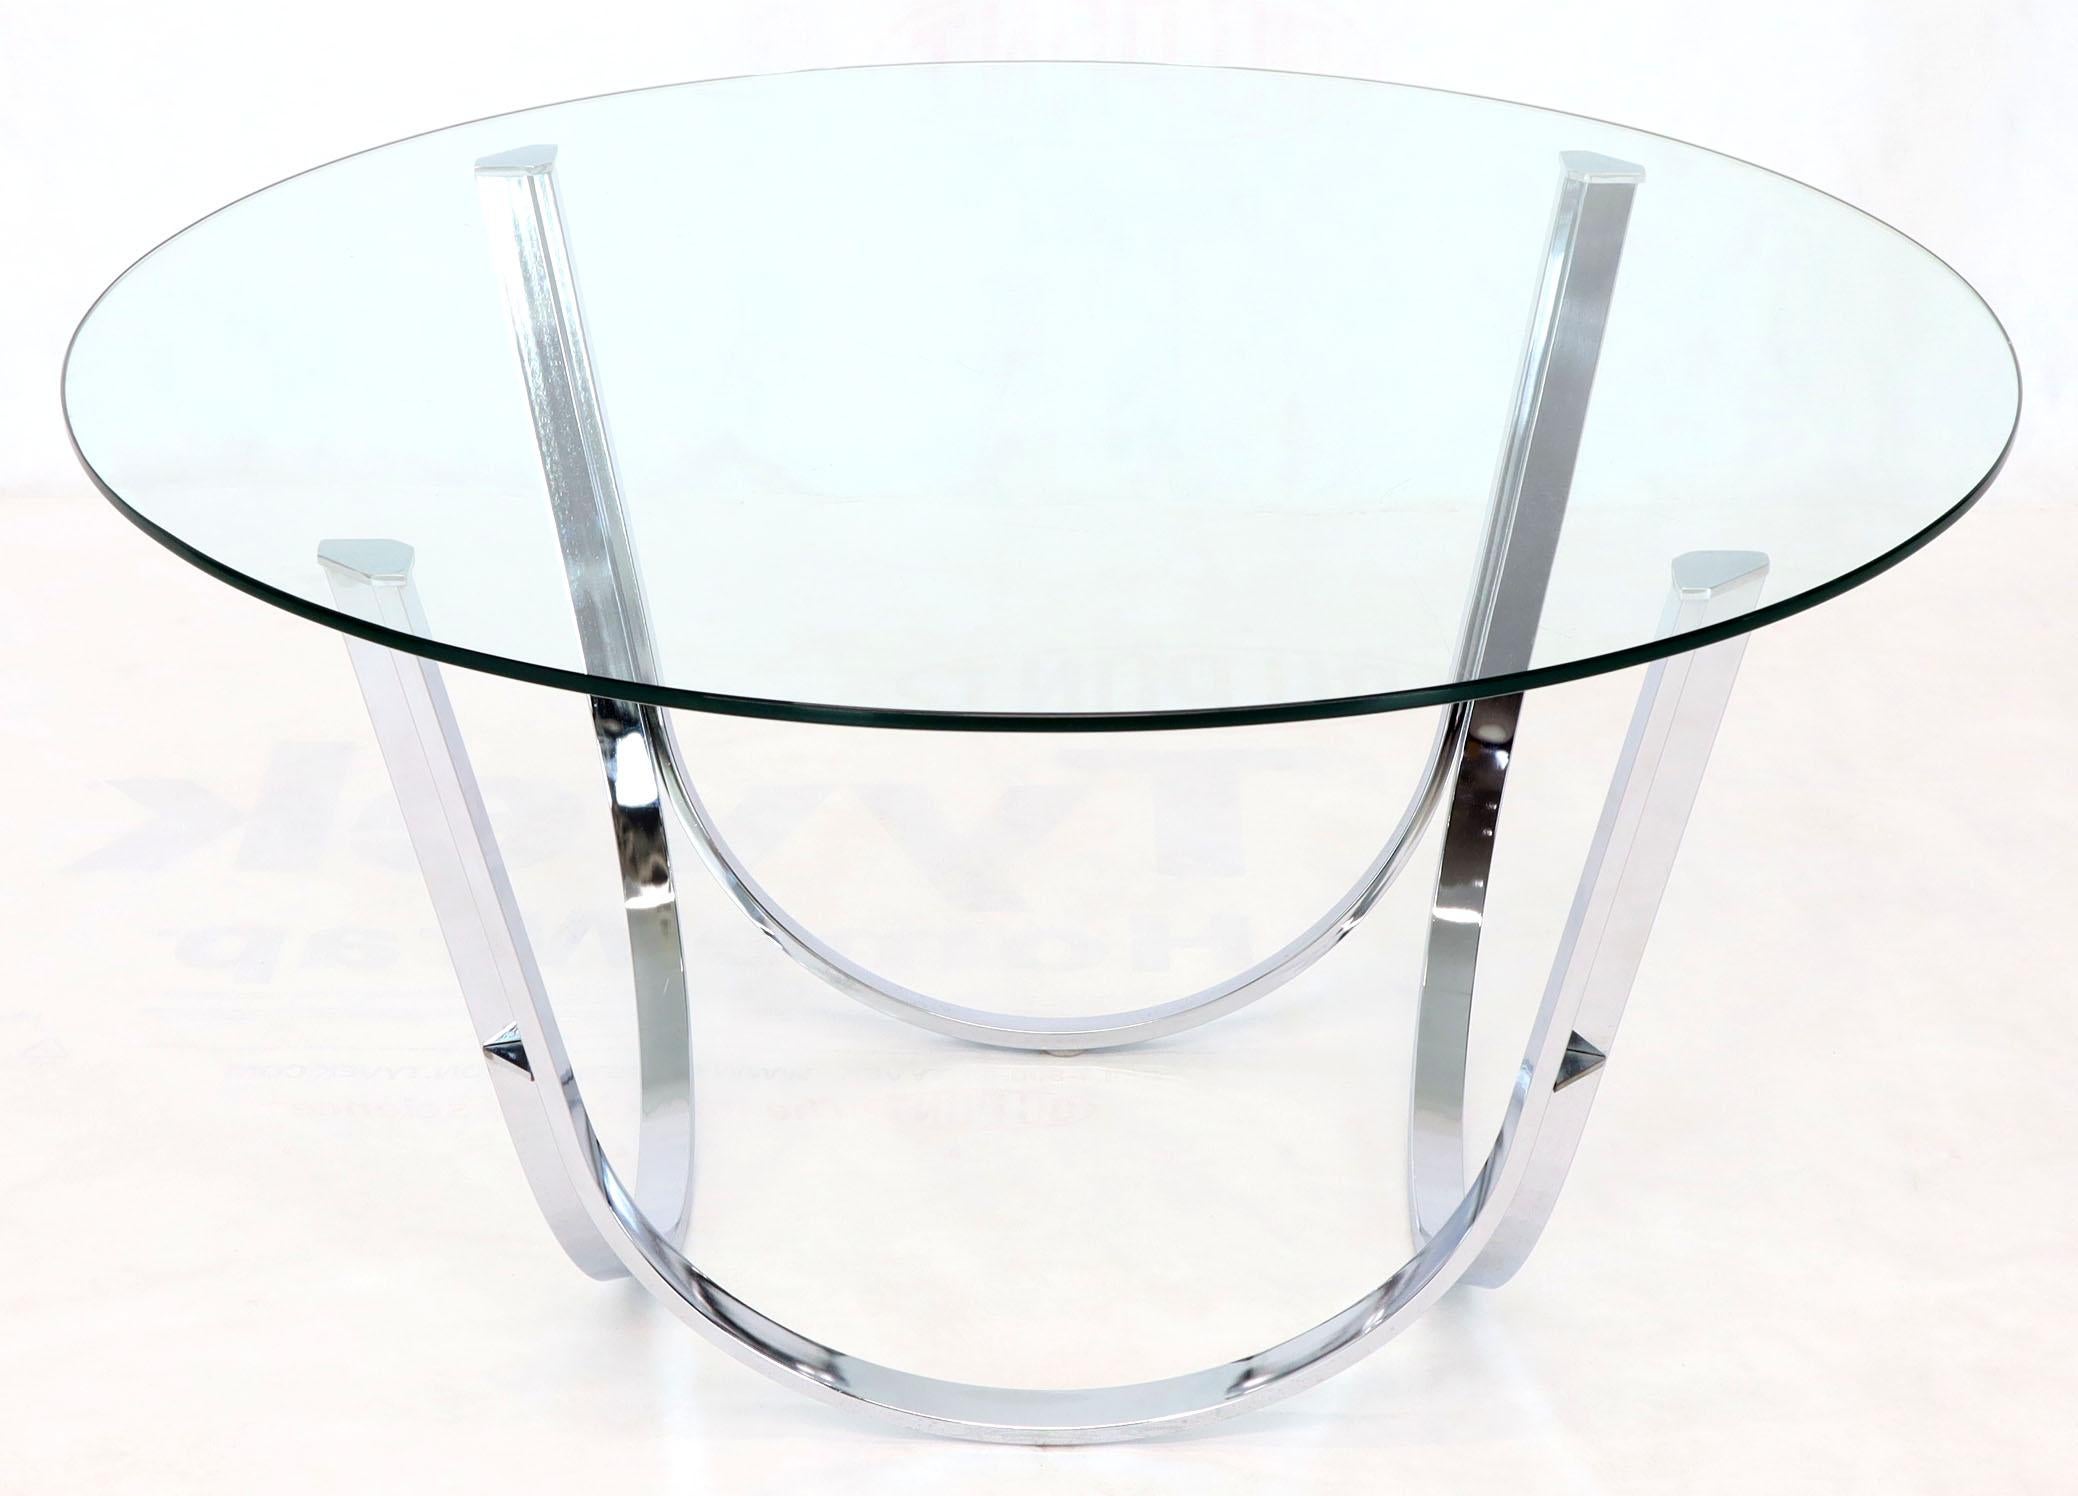 Mid-Century Modern chrome and glass round coffee table by Roger Sprunger for Dunbar. This table is 22